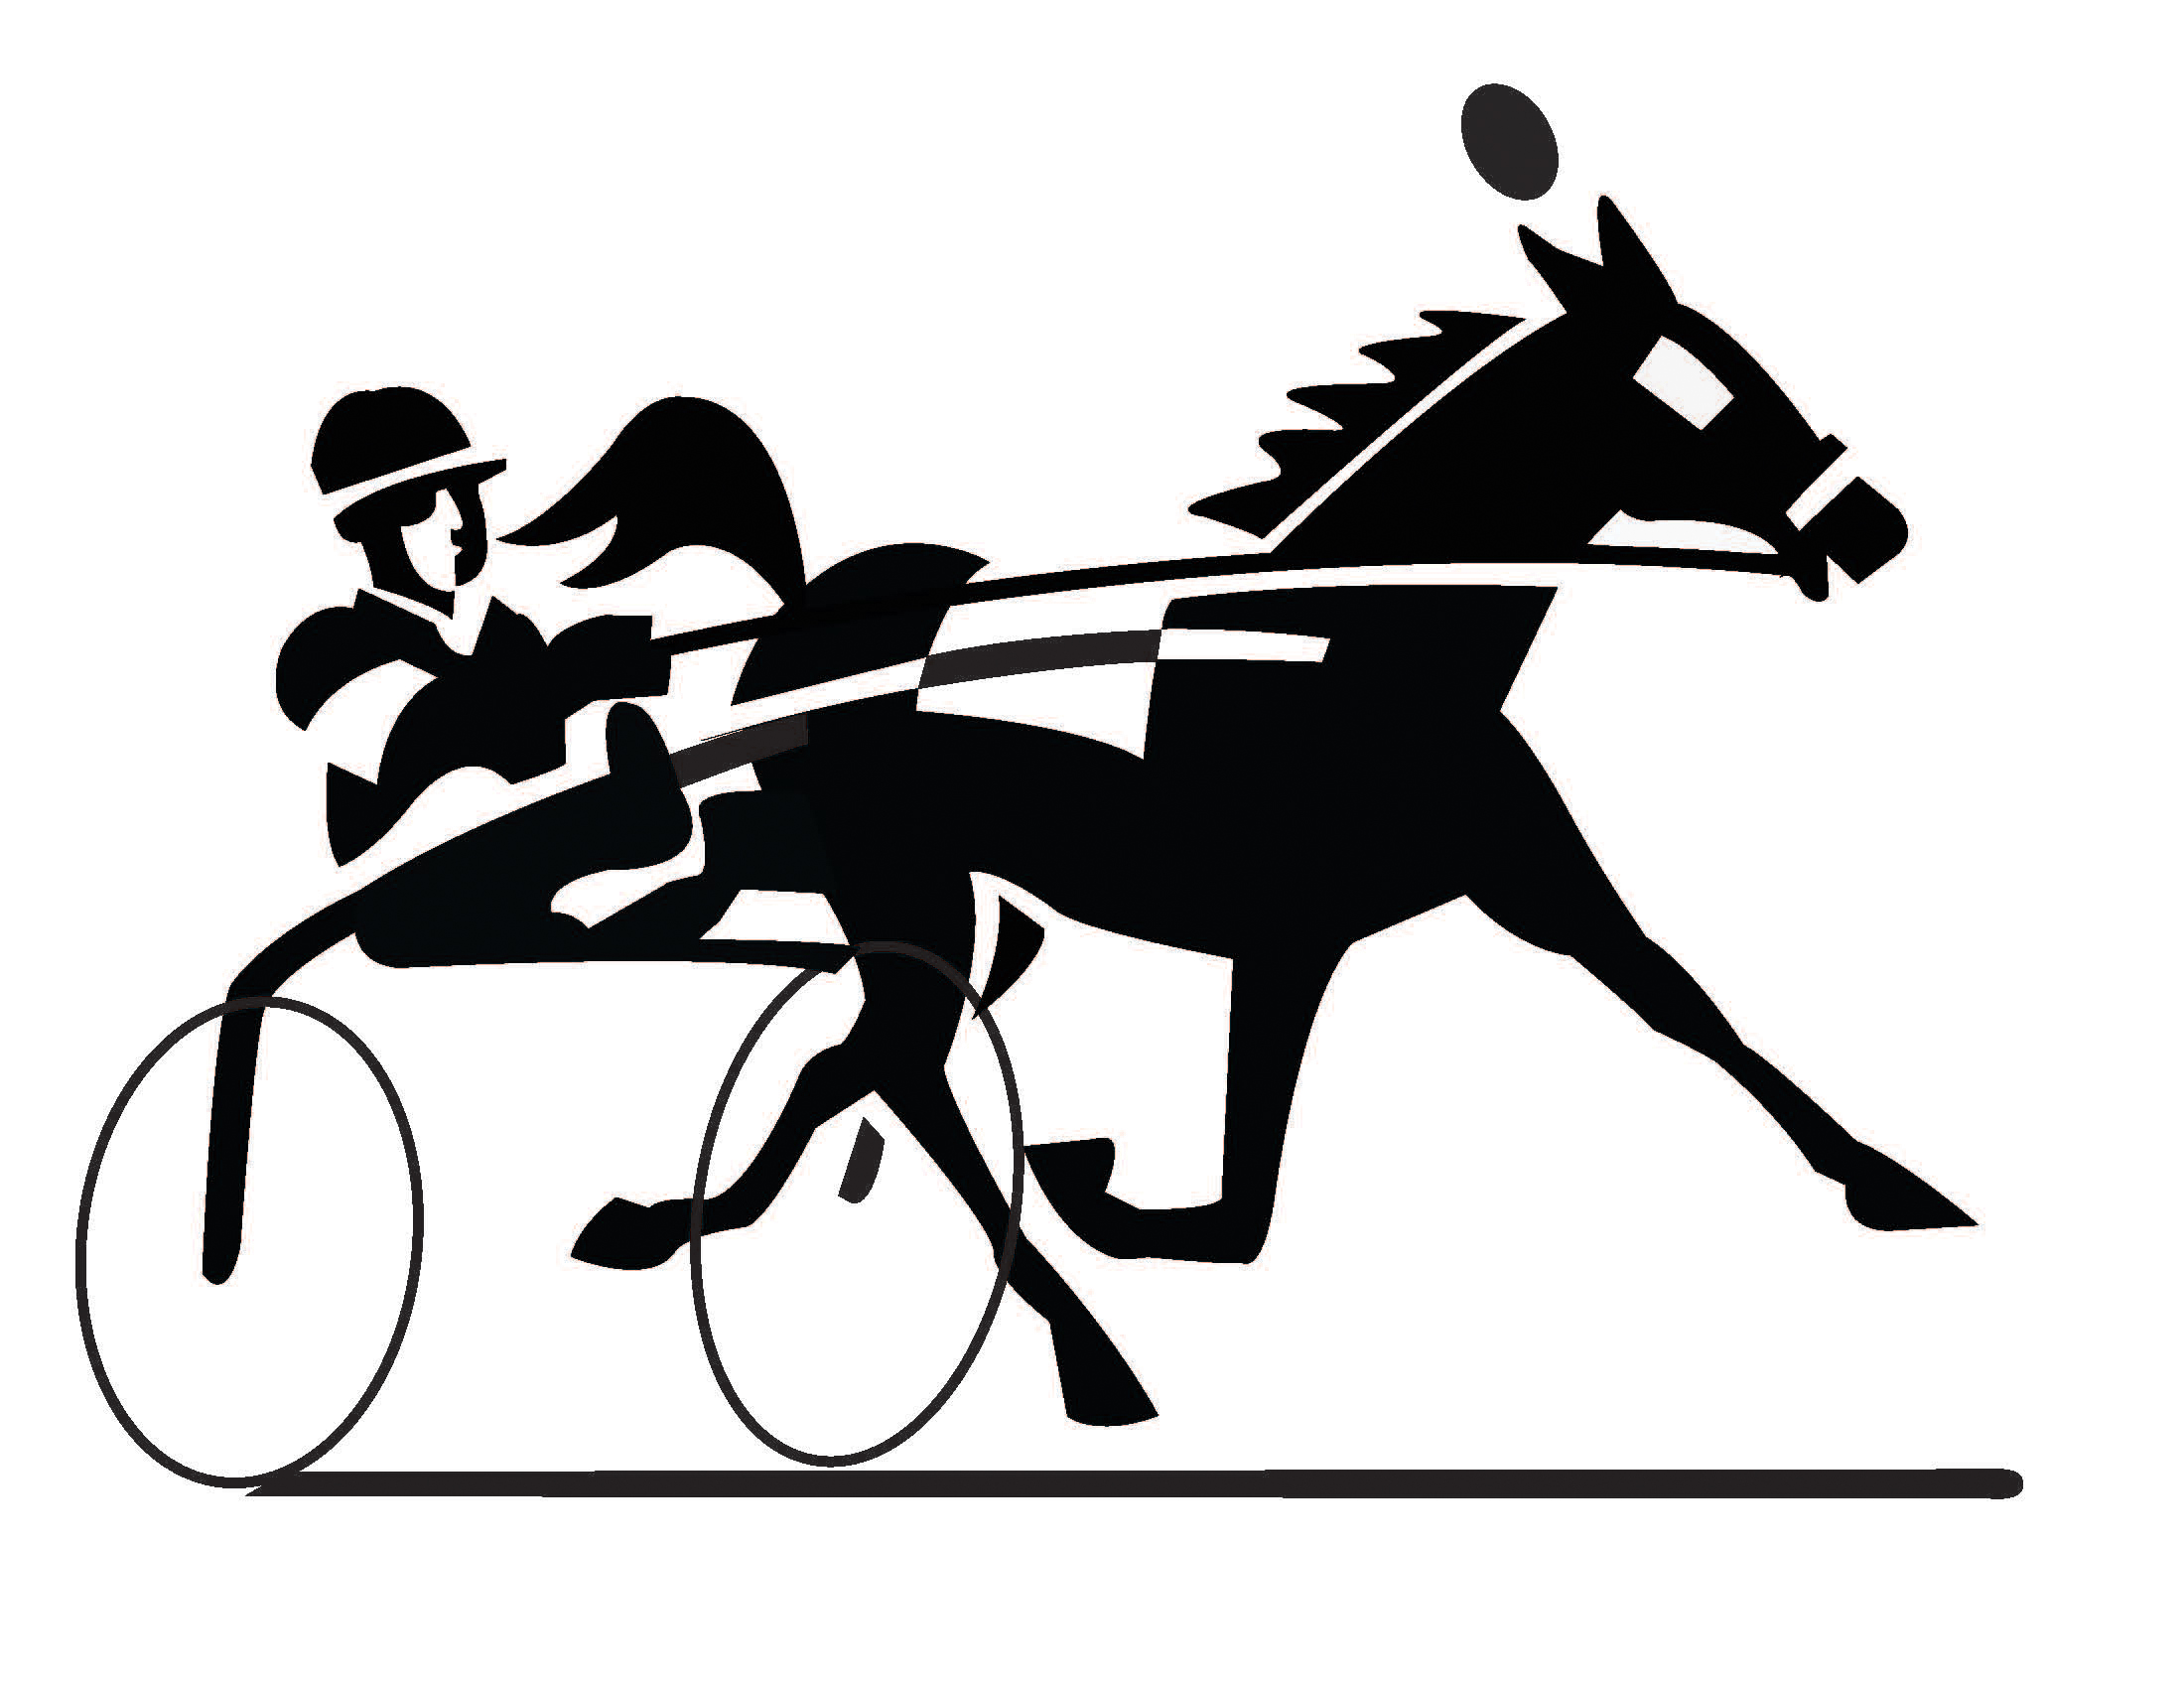 Cowgirl clipart barrel racing. Pin by symbolsense on